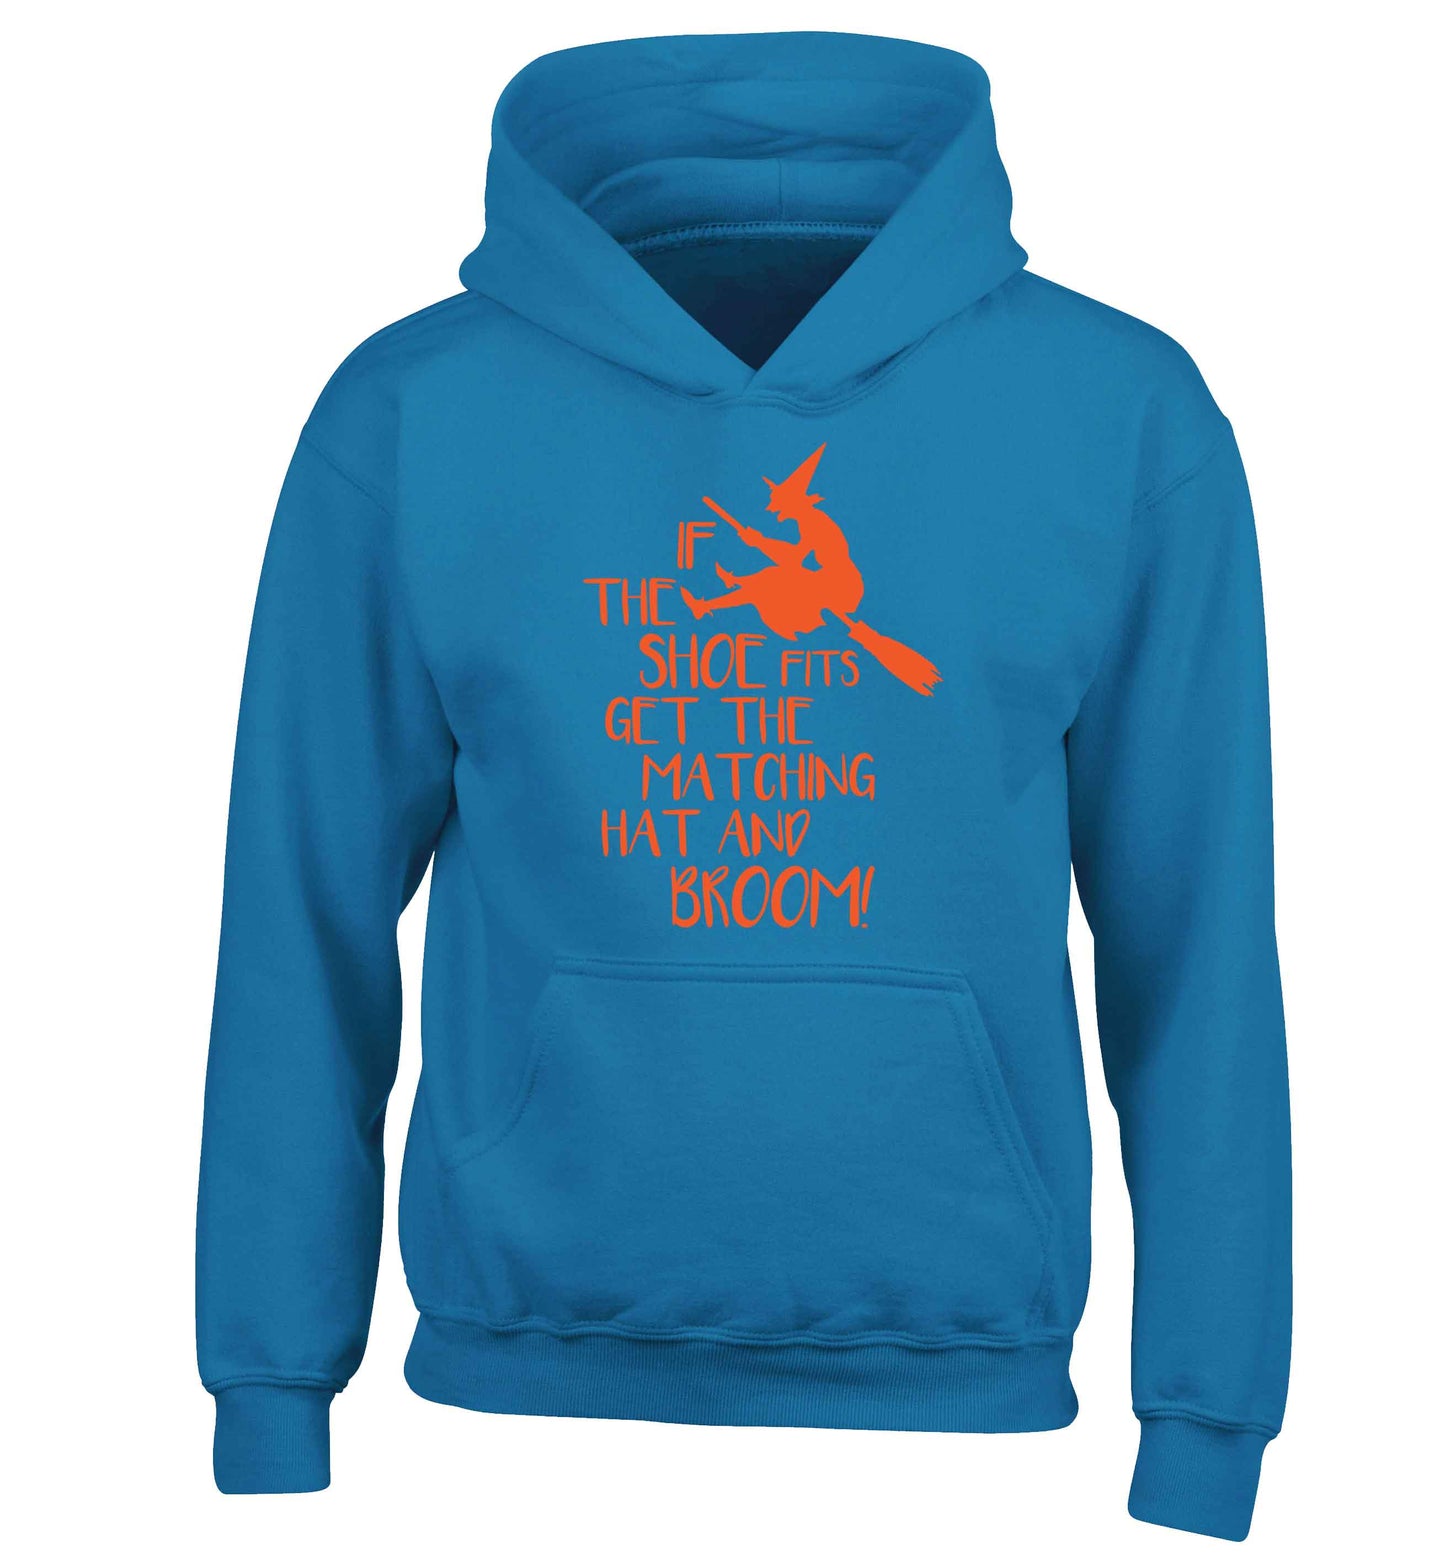 If the shoe fits get the matching hat and broom children's blue hoodie 12-13 Years